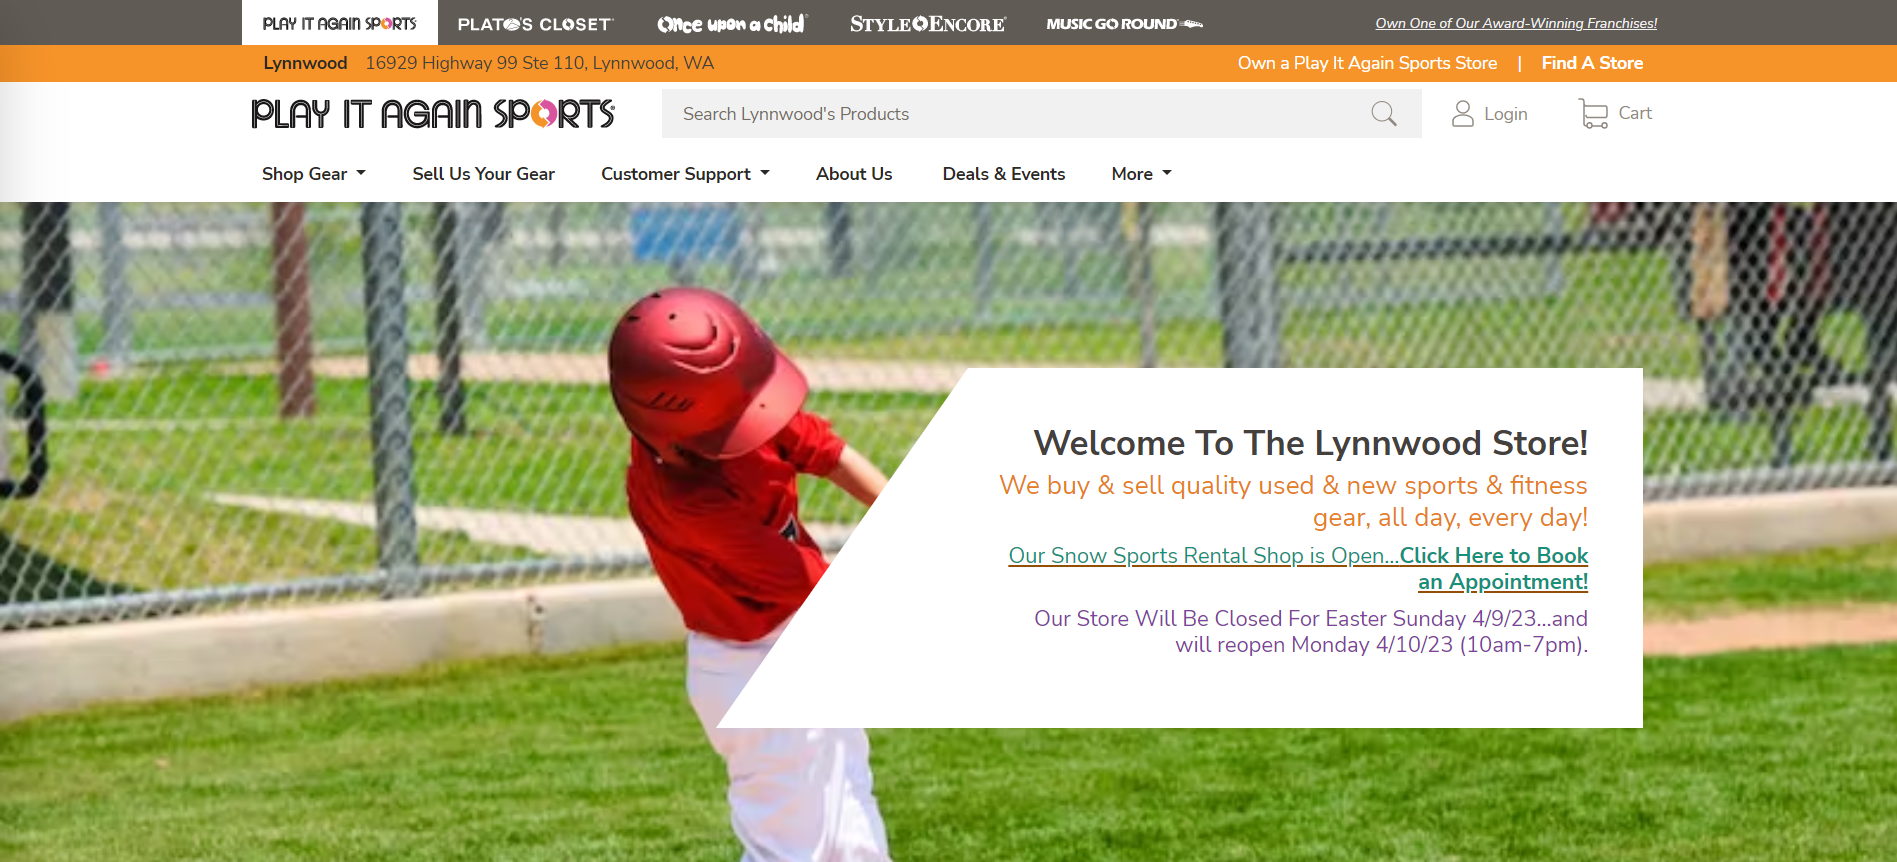 Play It Again Sports Lynnwood Website Homepage with store info and link to appoinmnent booking in front of a little league baseball game.